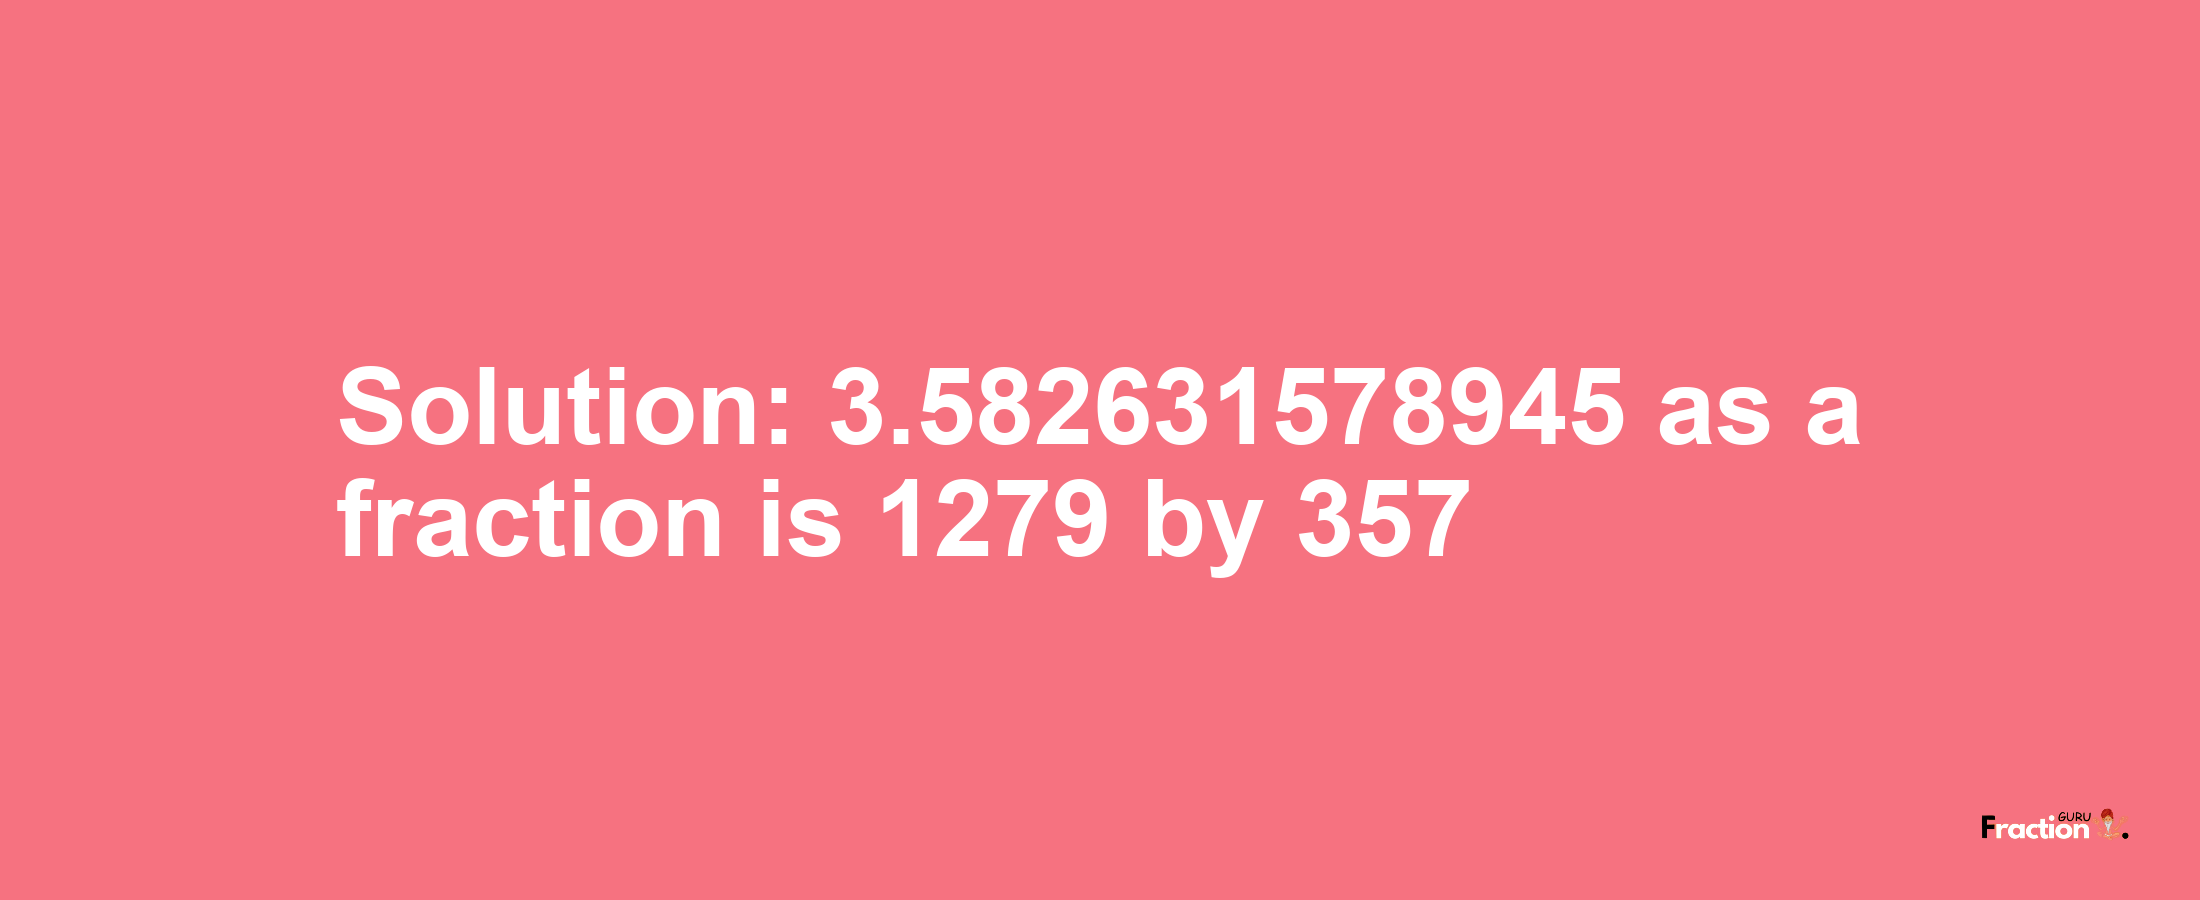 Solution:3.582631578945 as a fraction is 1279/357